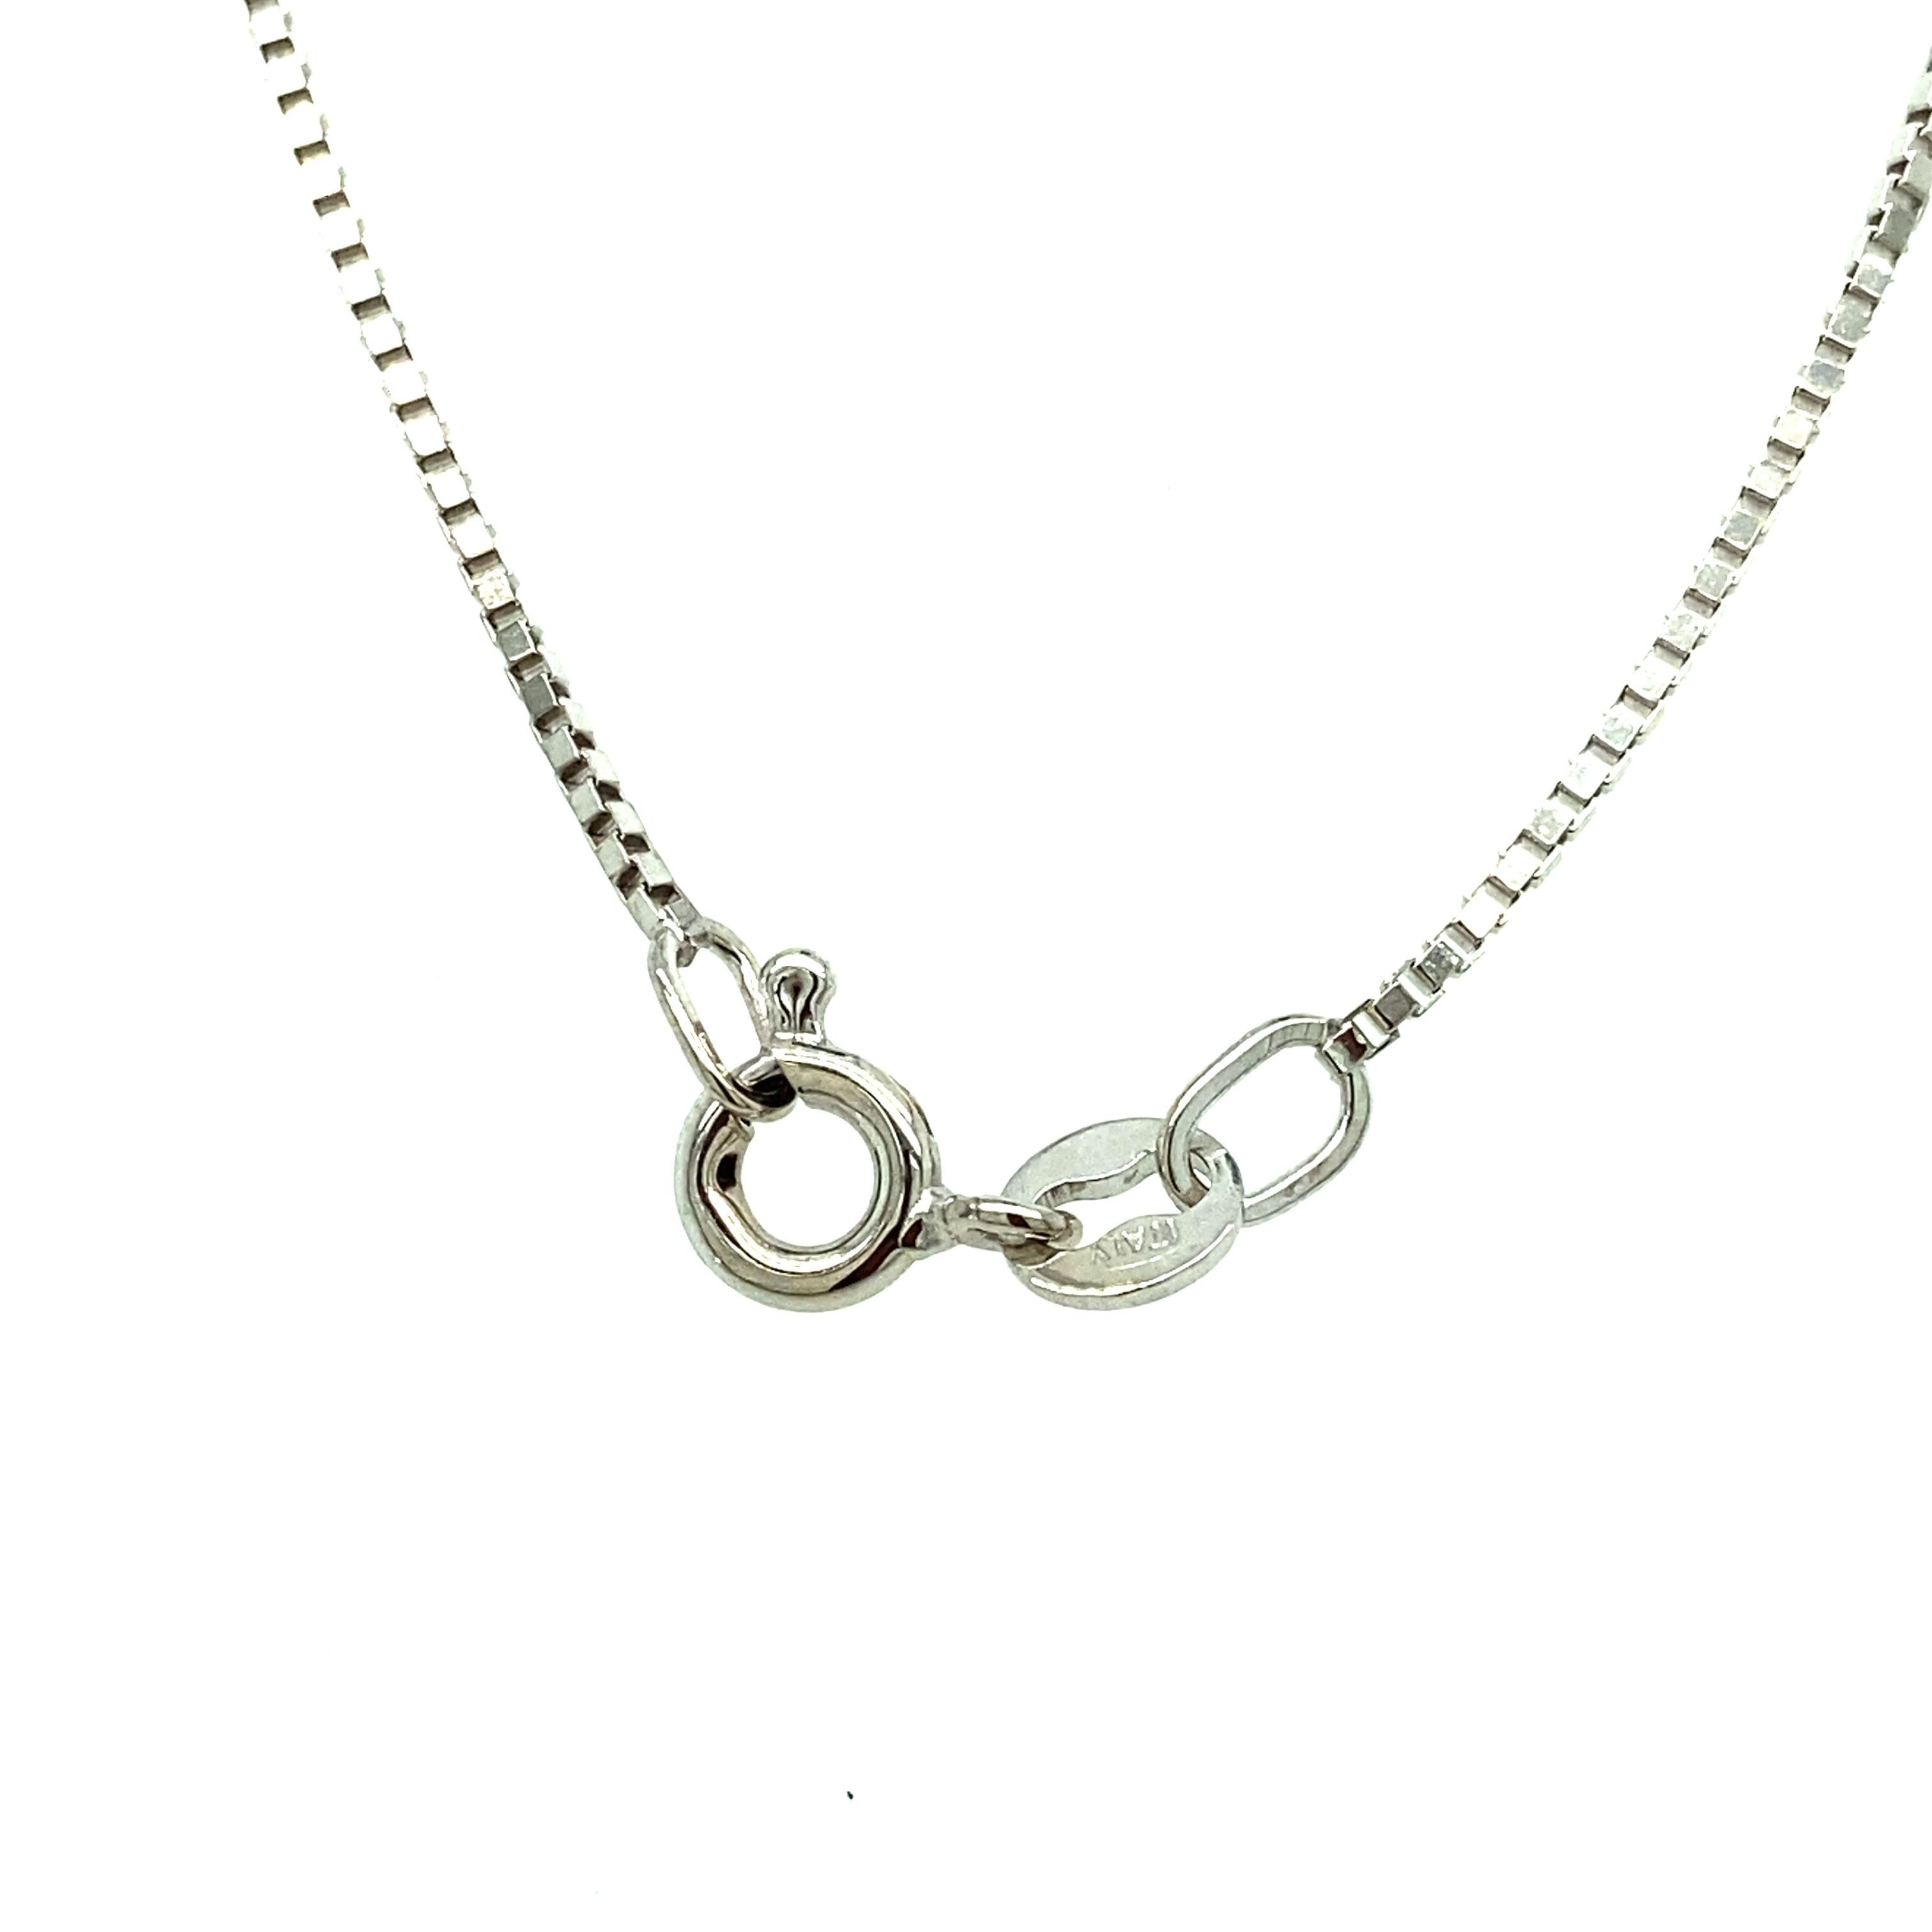 14 karat white gold box chain measuring 15 inches long with a spring ring clasp.  